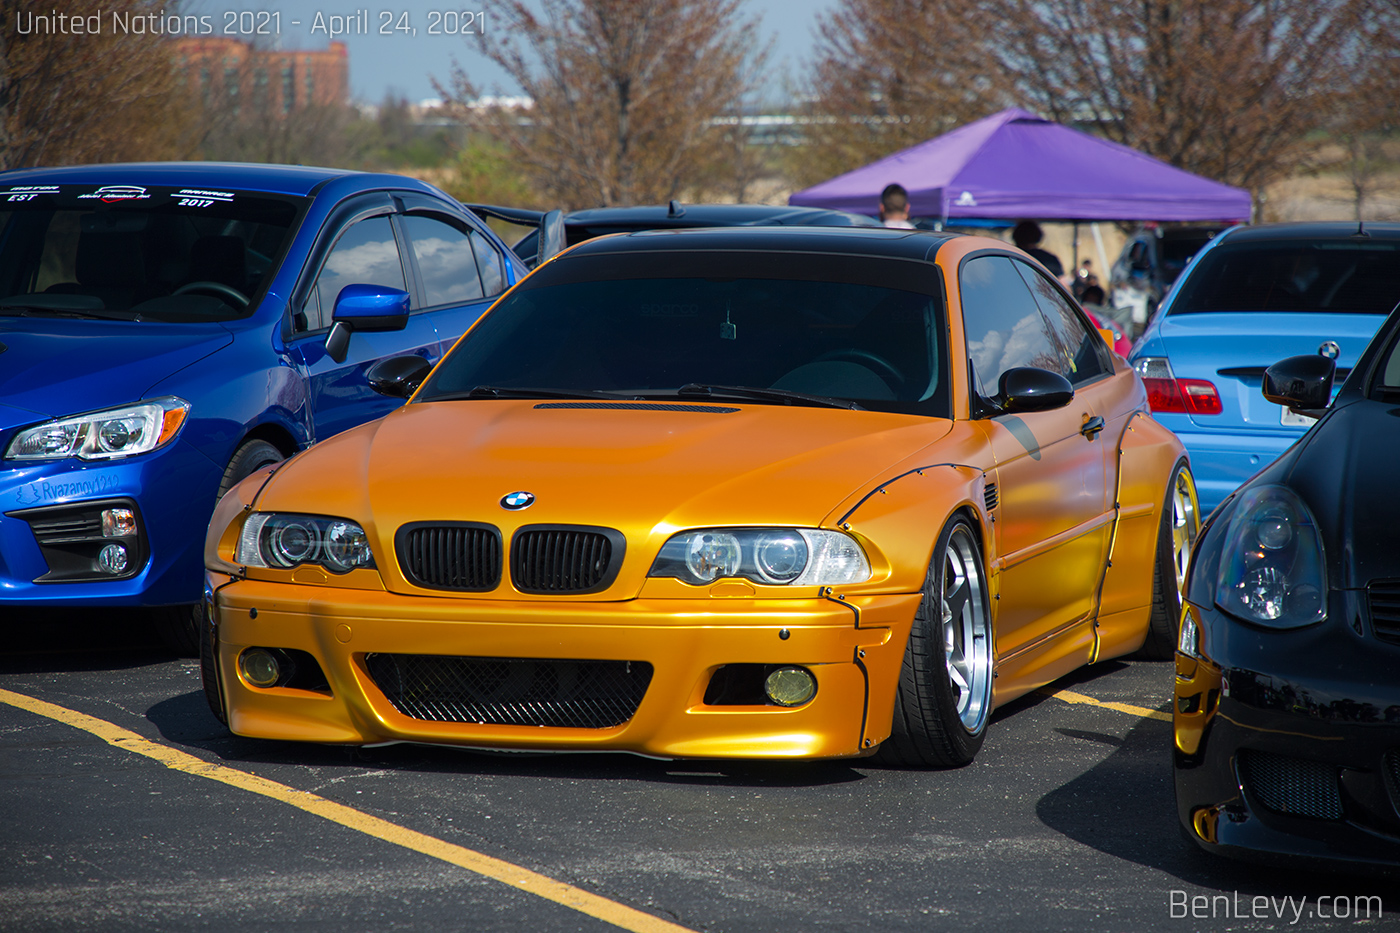 Gold Wrap on E46 M3 with Widebody